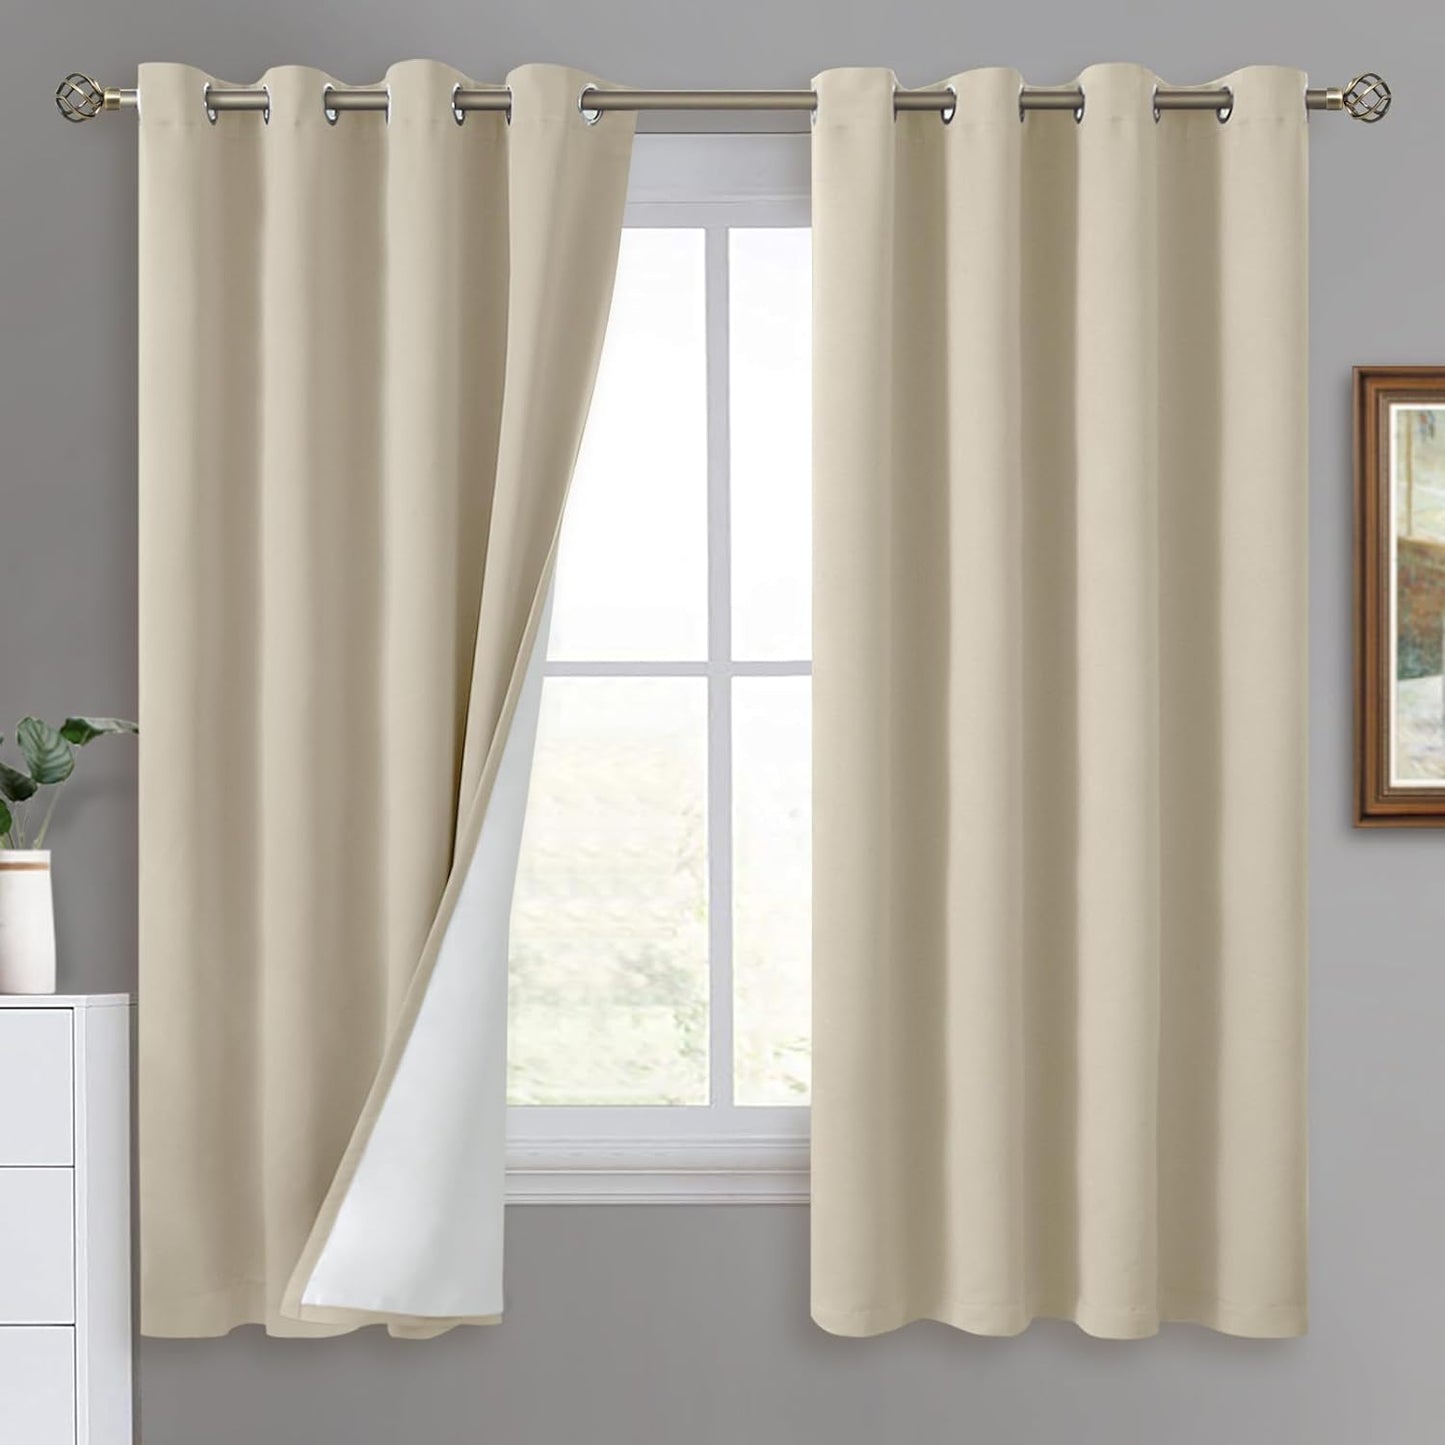 QUEMAS Short Blackout Curtains 54 Inch Length 2 Panels, 100% Light Blocking Thermal Insulated Soundproof Grommet Small Window Curtains for Bedroom Basement with Black Liner, Each 42 Inch Wide, White  QUEMAS Beige + White Lining W52 X L72 